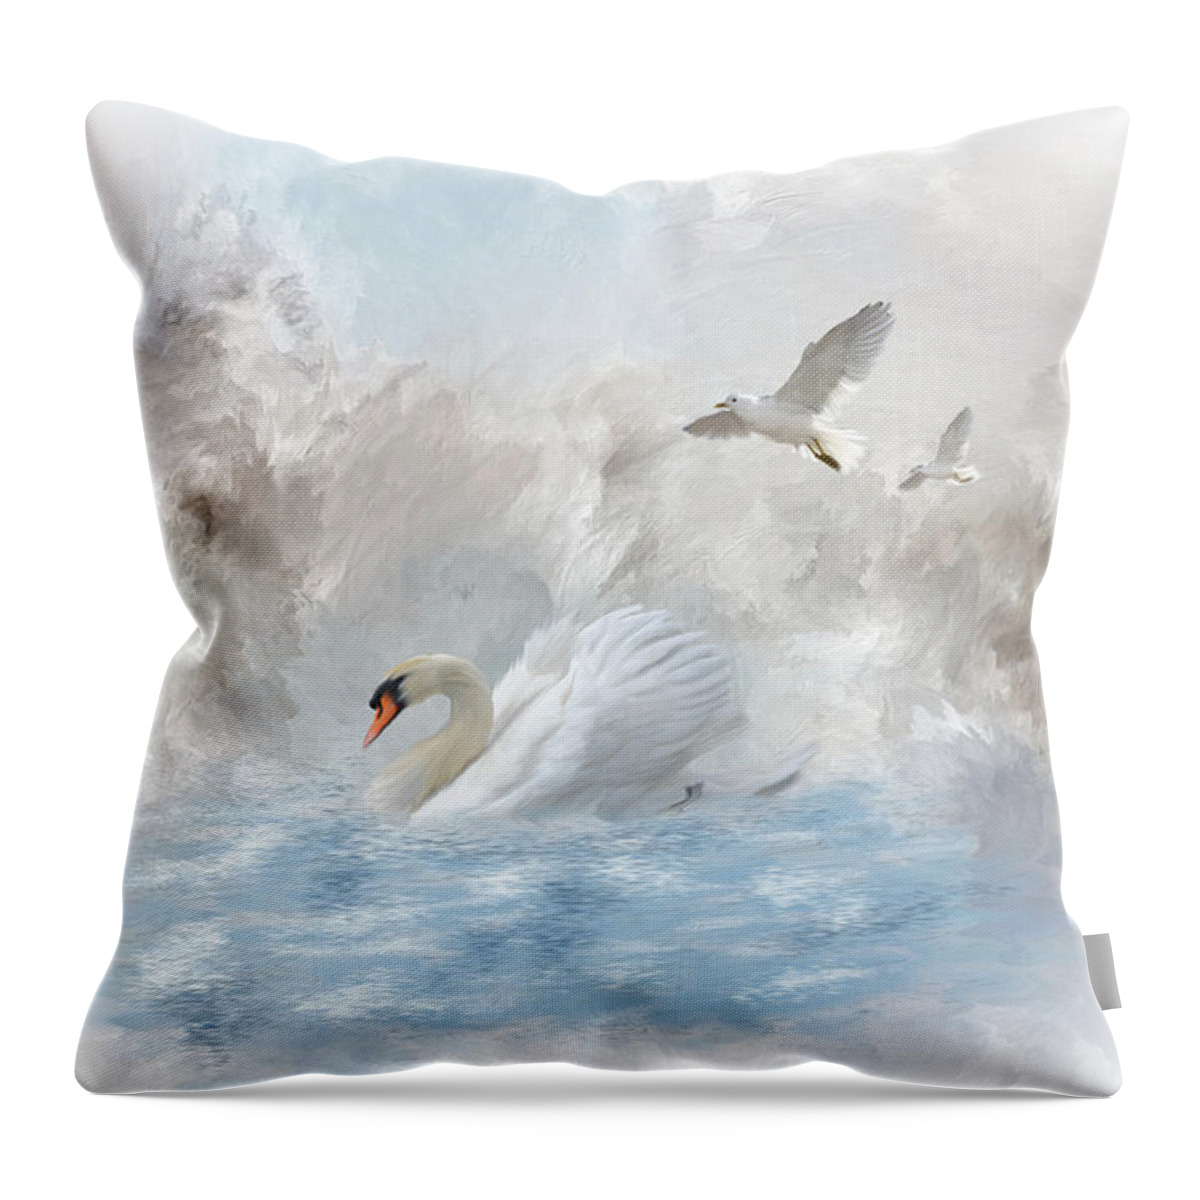 White Swan Throw Pillow featuring the photograph A Swan's Dream by Mary Timman